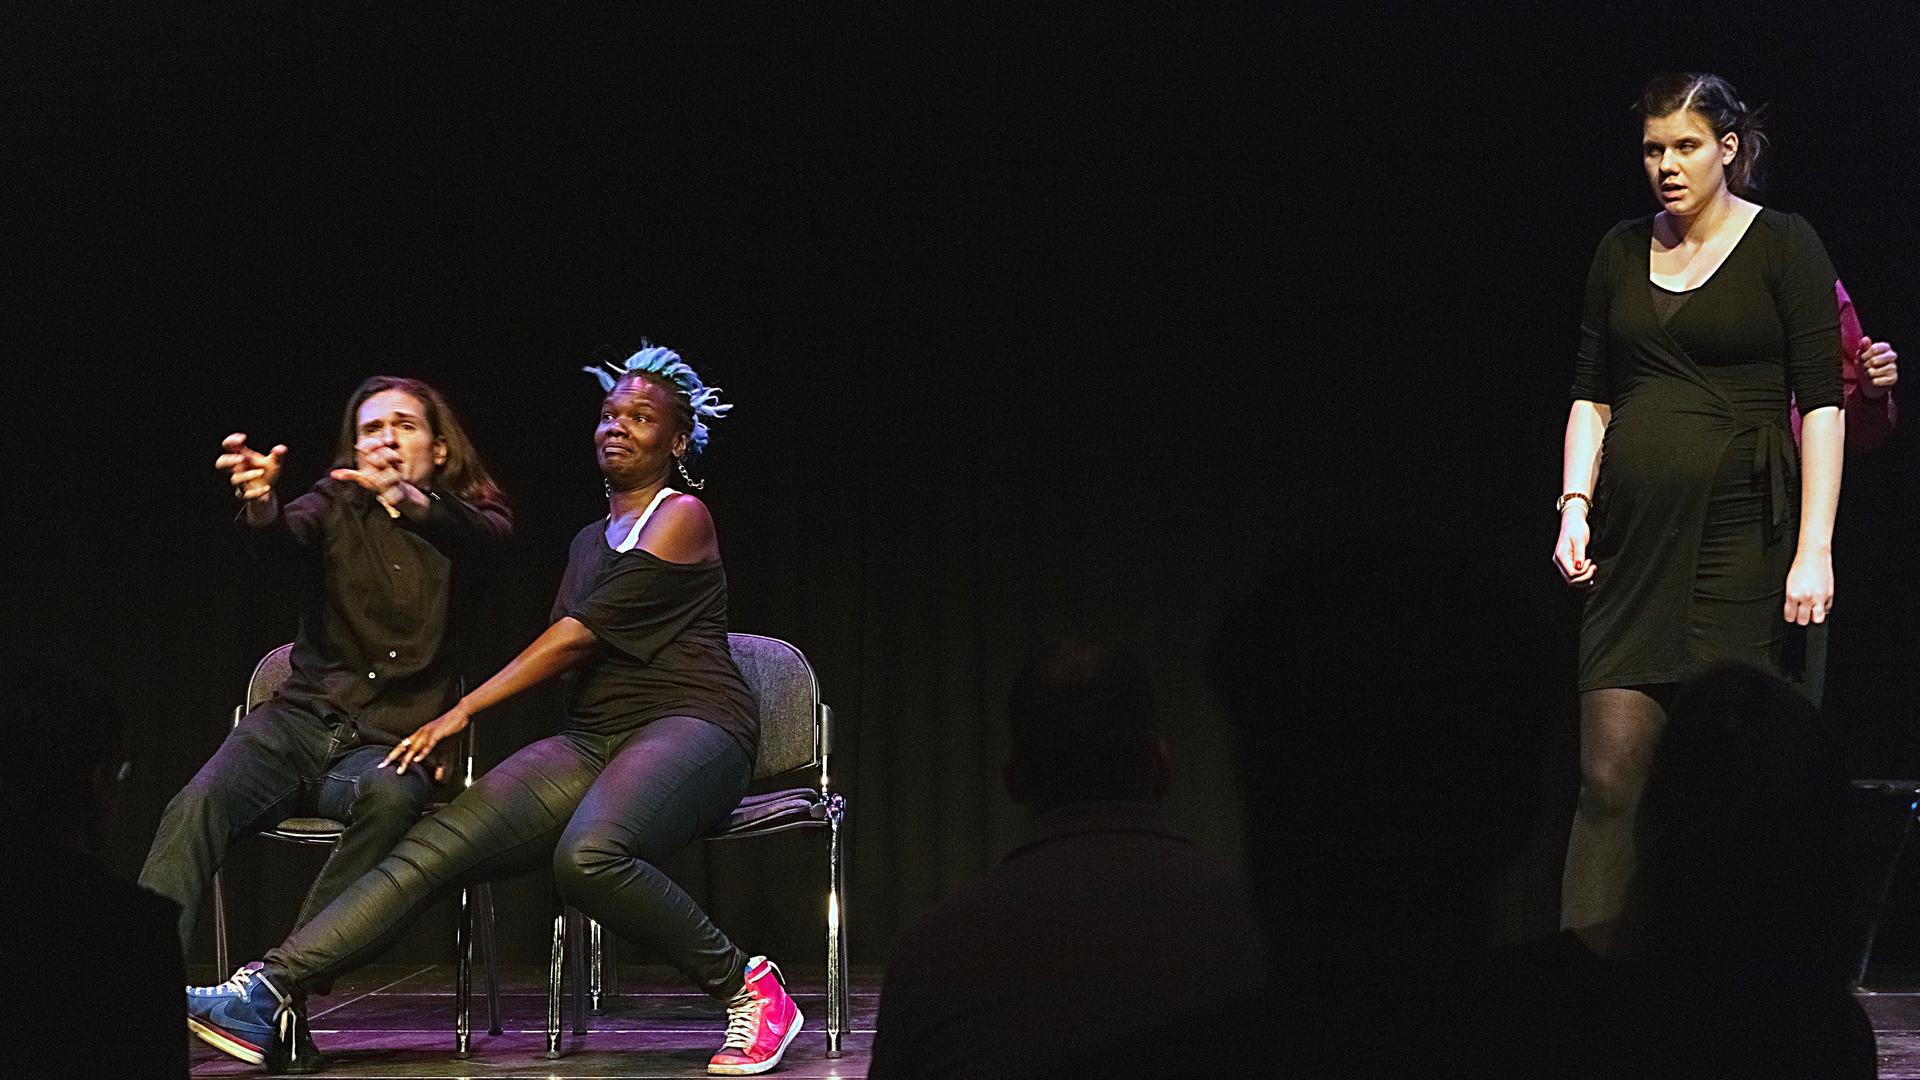 A performance from the Netherlands-based comedy improv group Easy Laughs. 